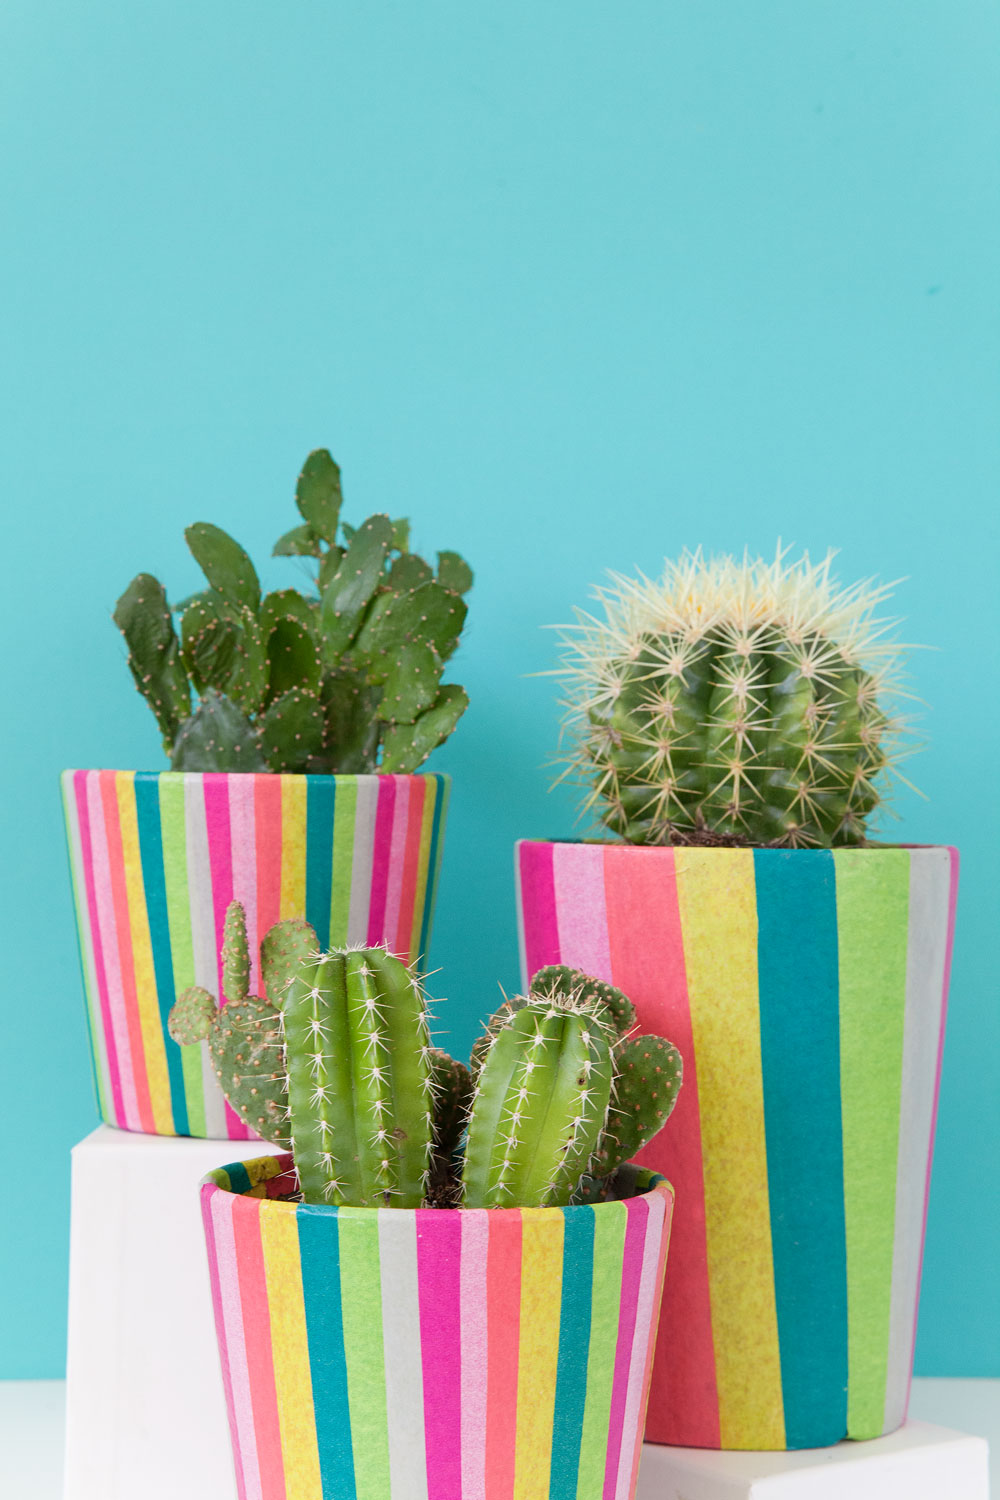 DIY-colorful-striped-pots-and-cute-cacti